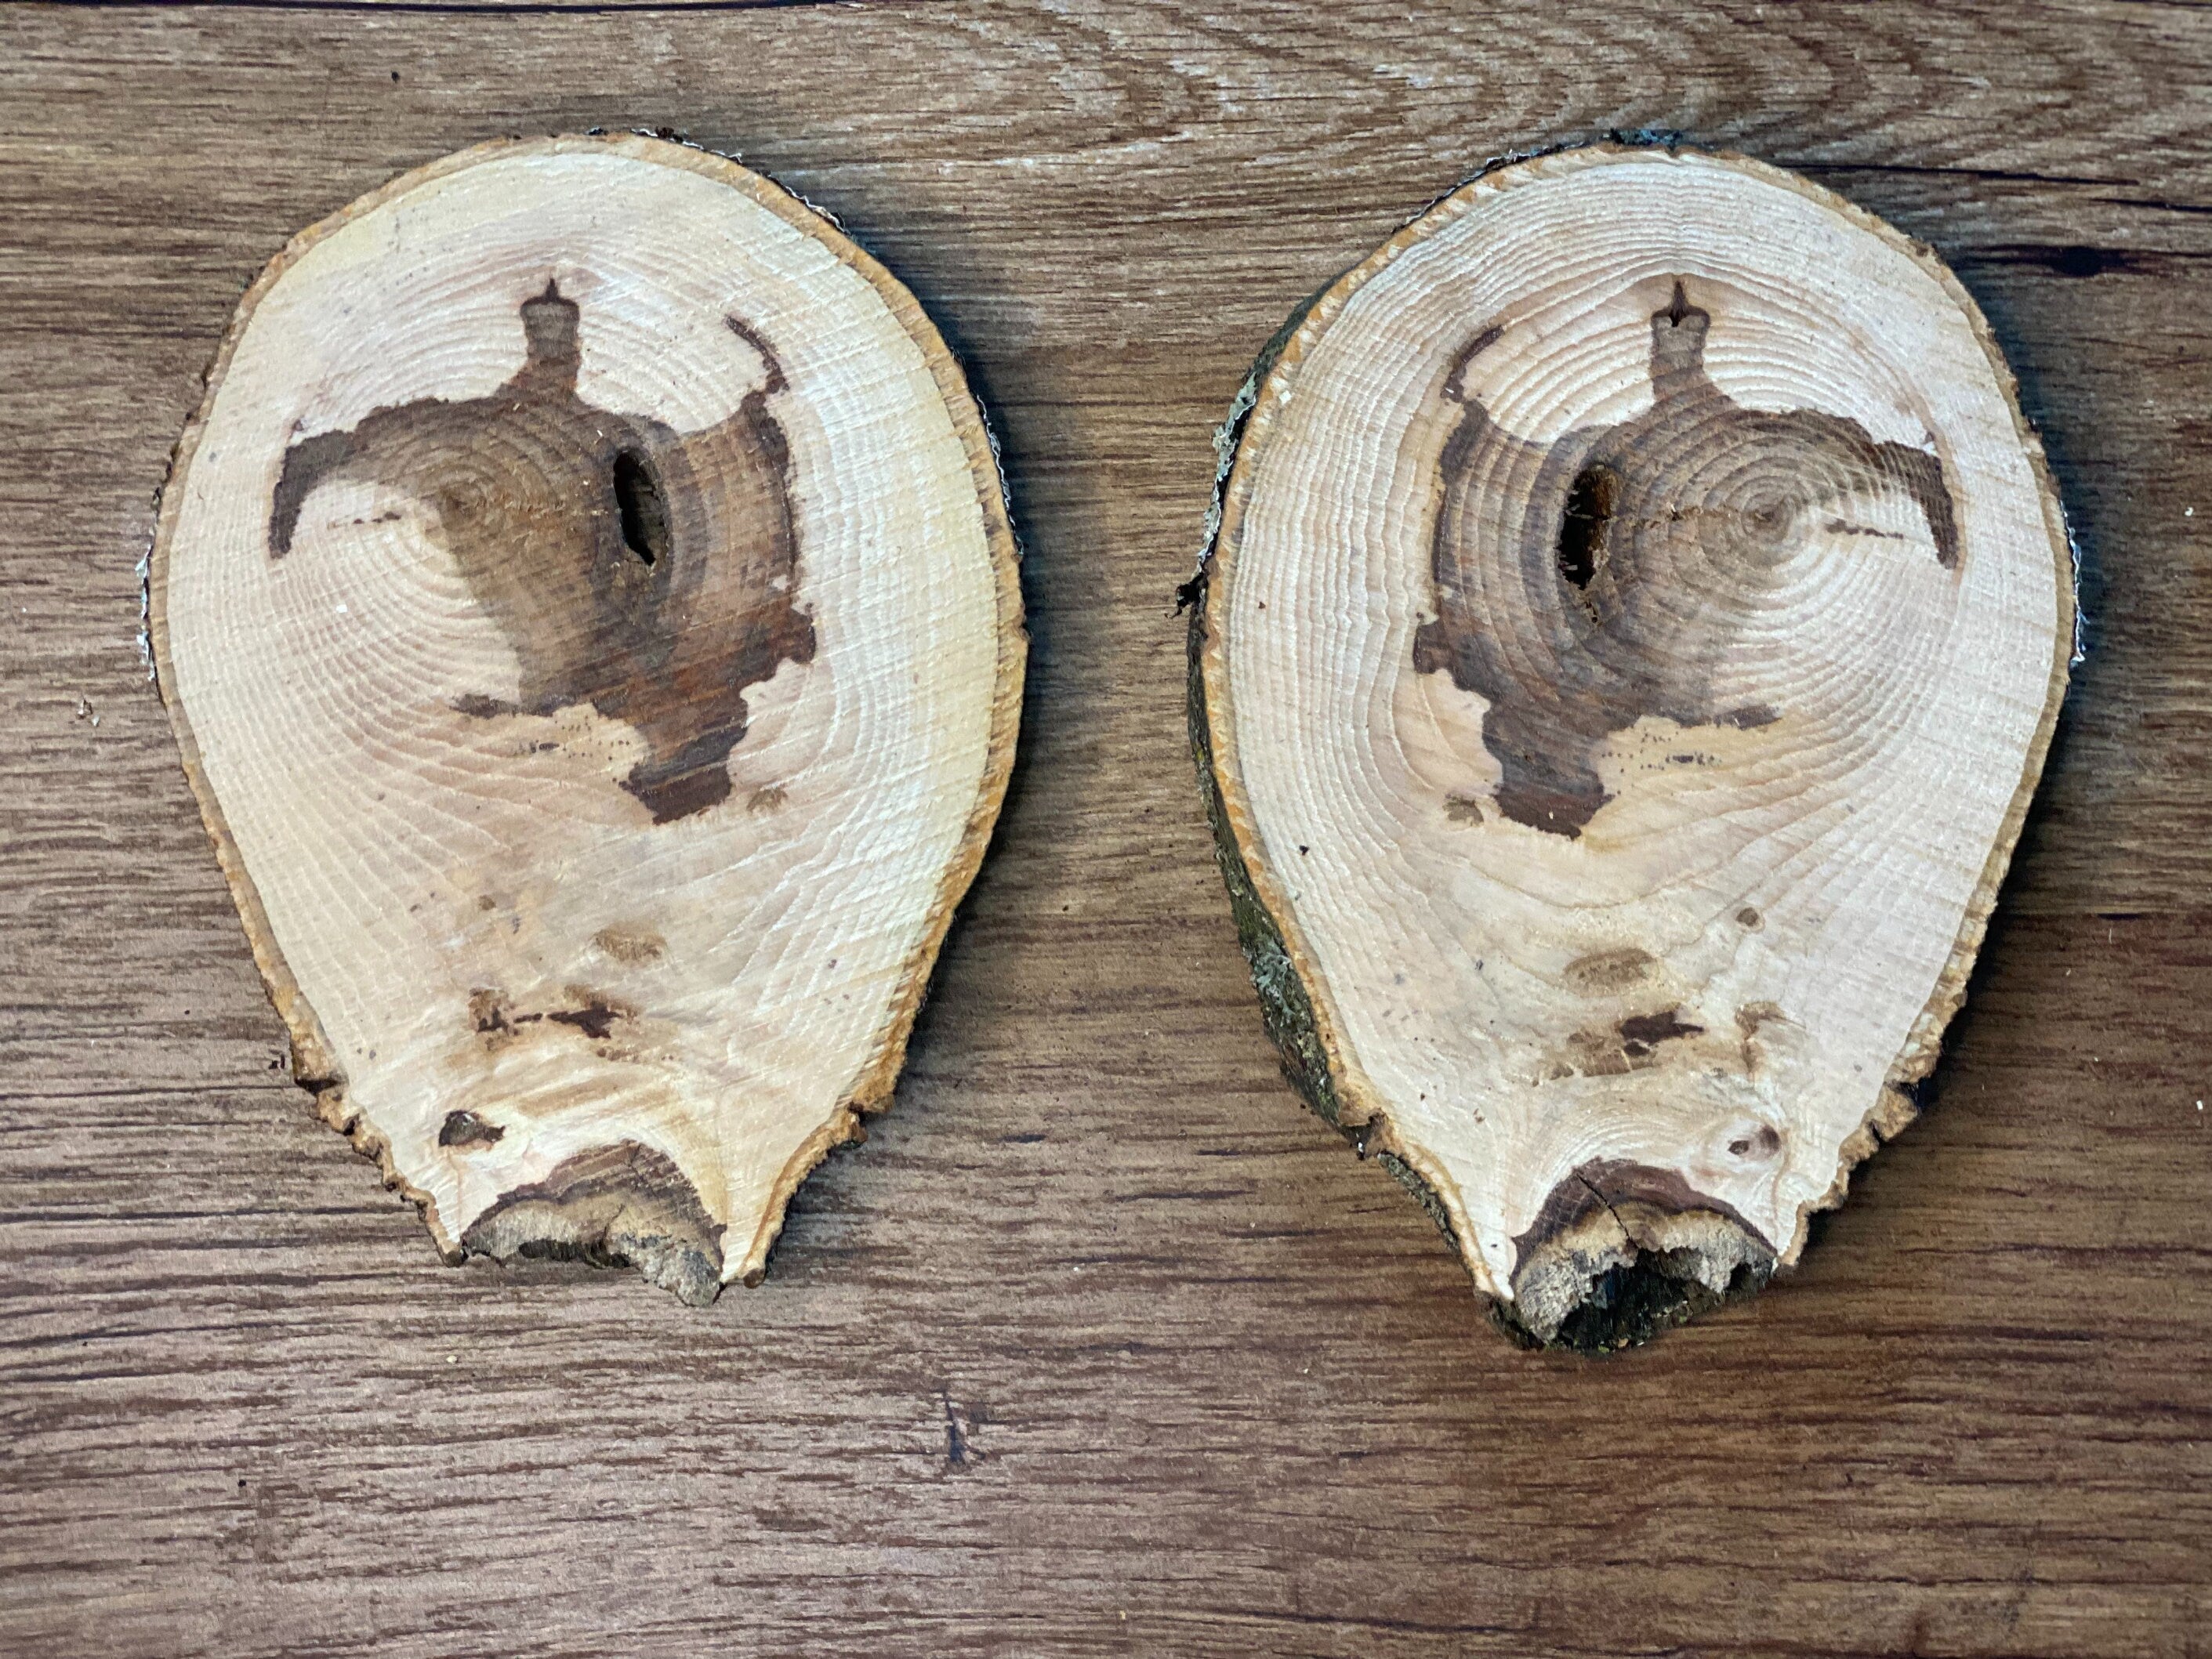 Two Hickory Burl Slices, 2 Count, Approximately 6.5-7 Inches Long by 4.5-5 Inches Wide